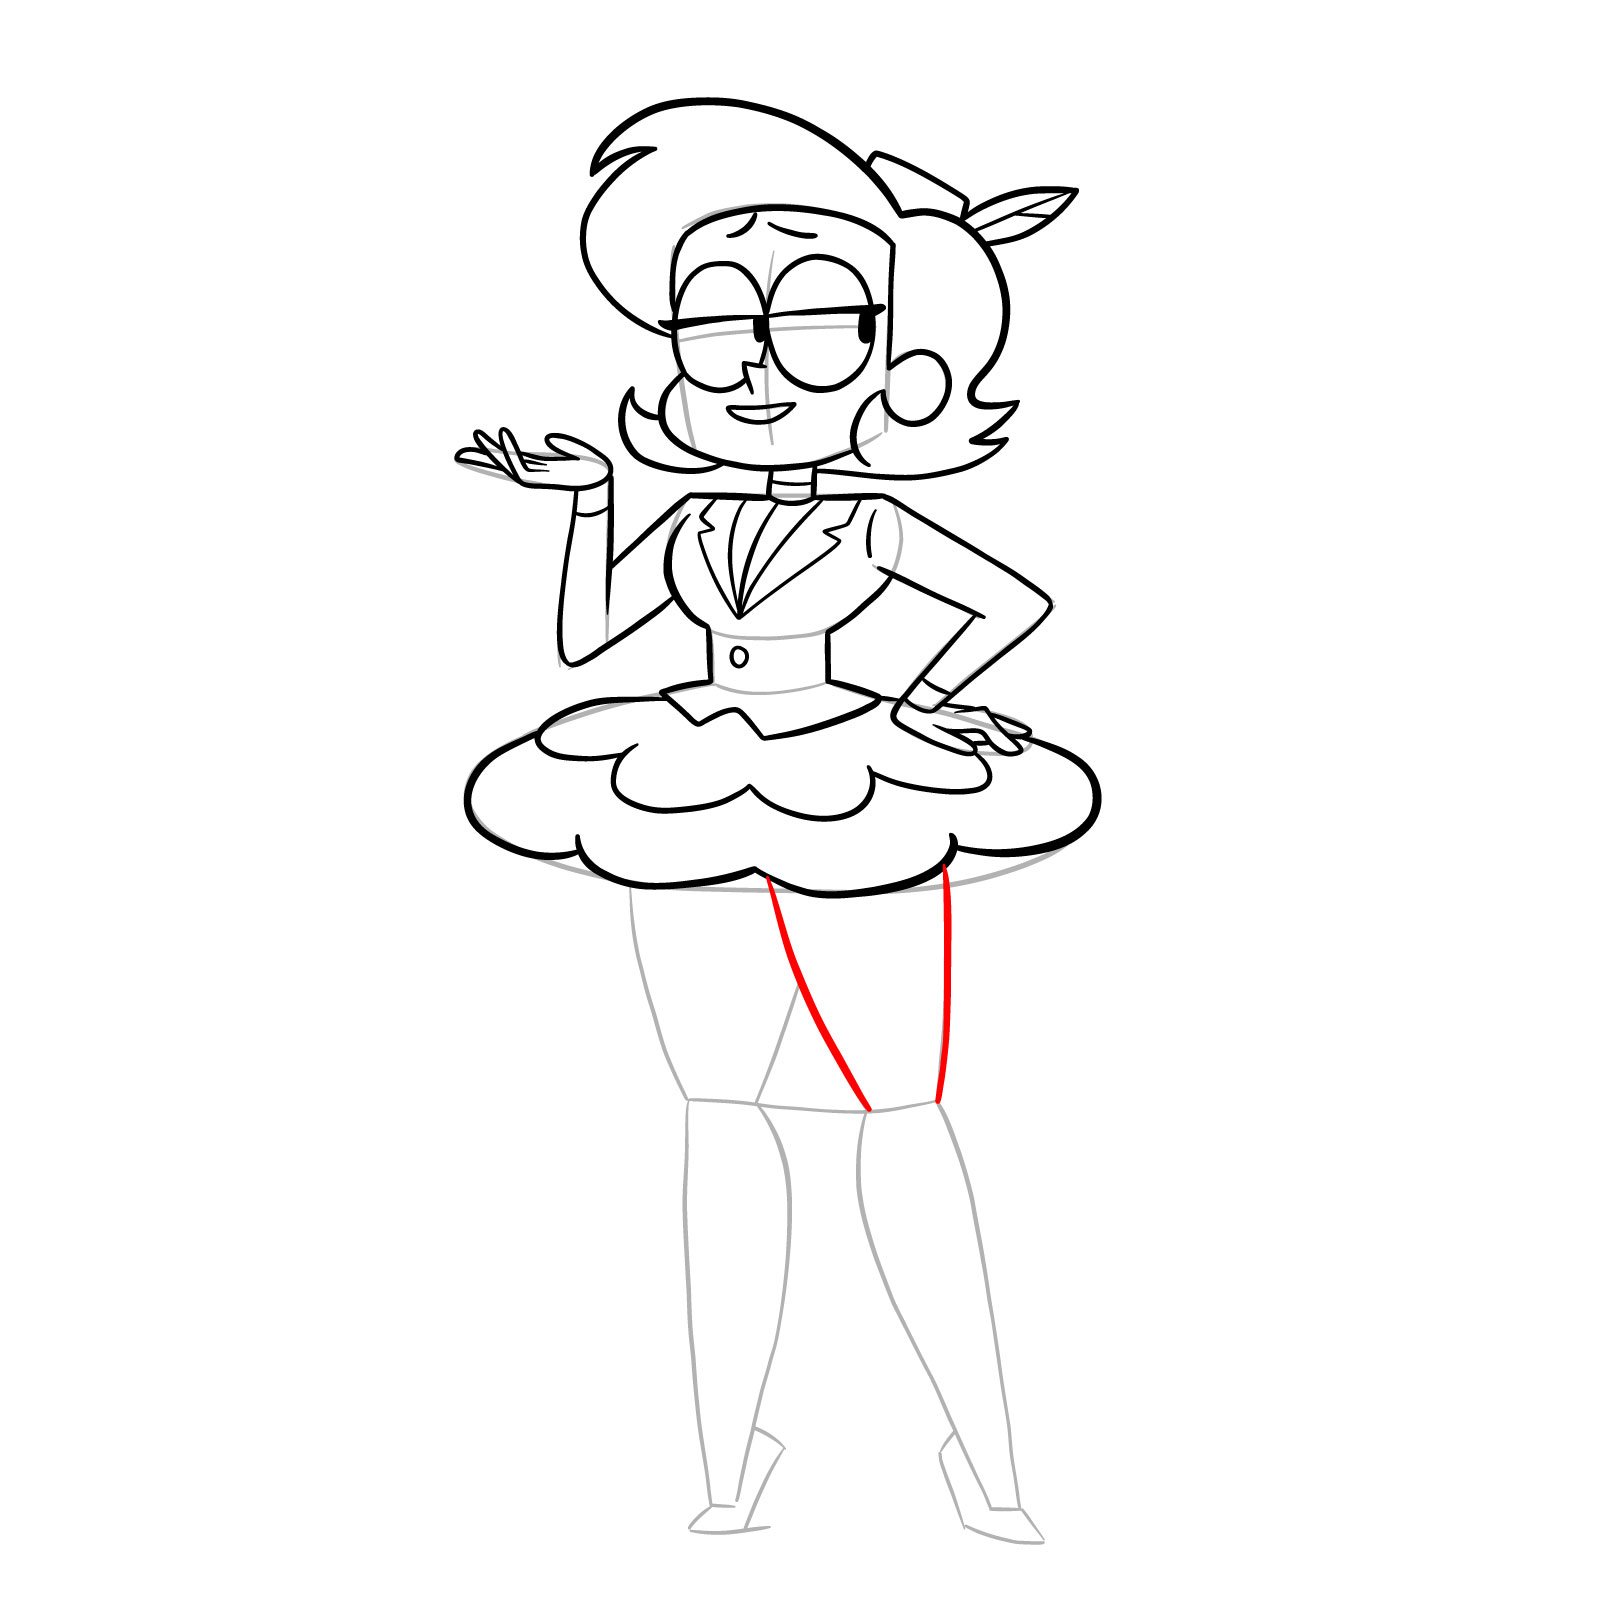 How to draw Elodie from OK K.O.! - step 30